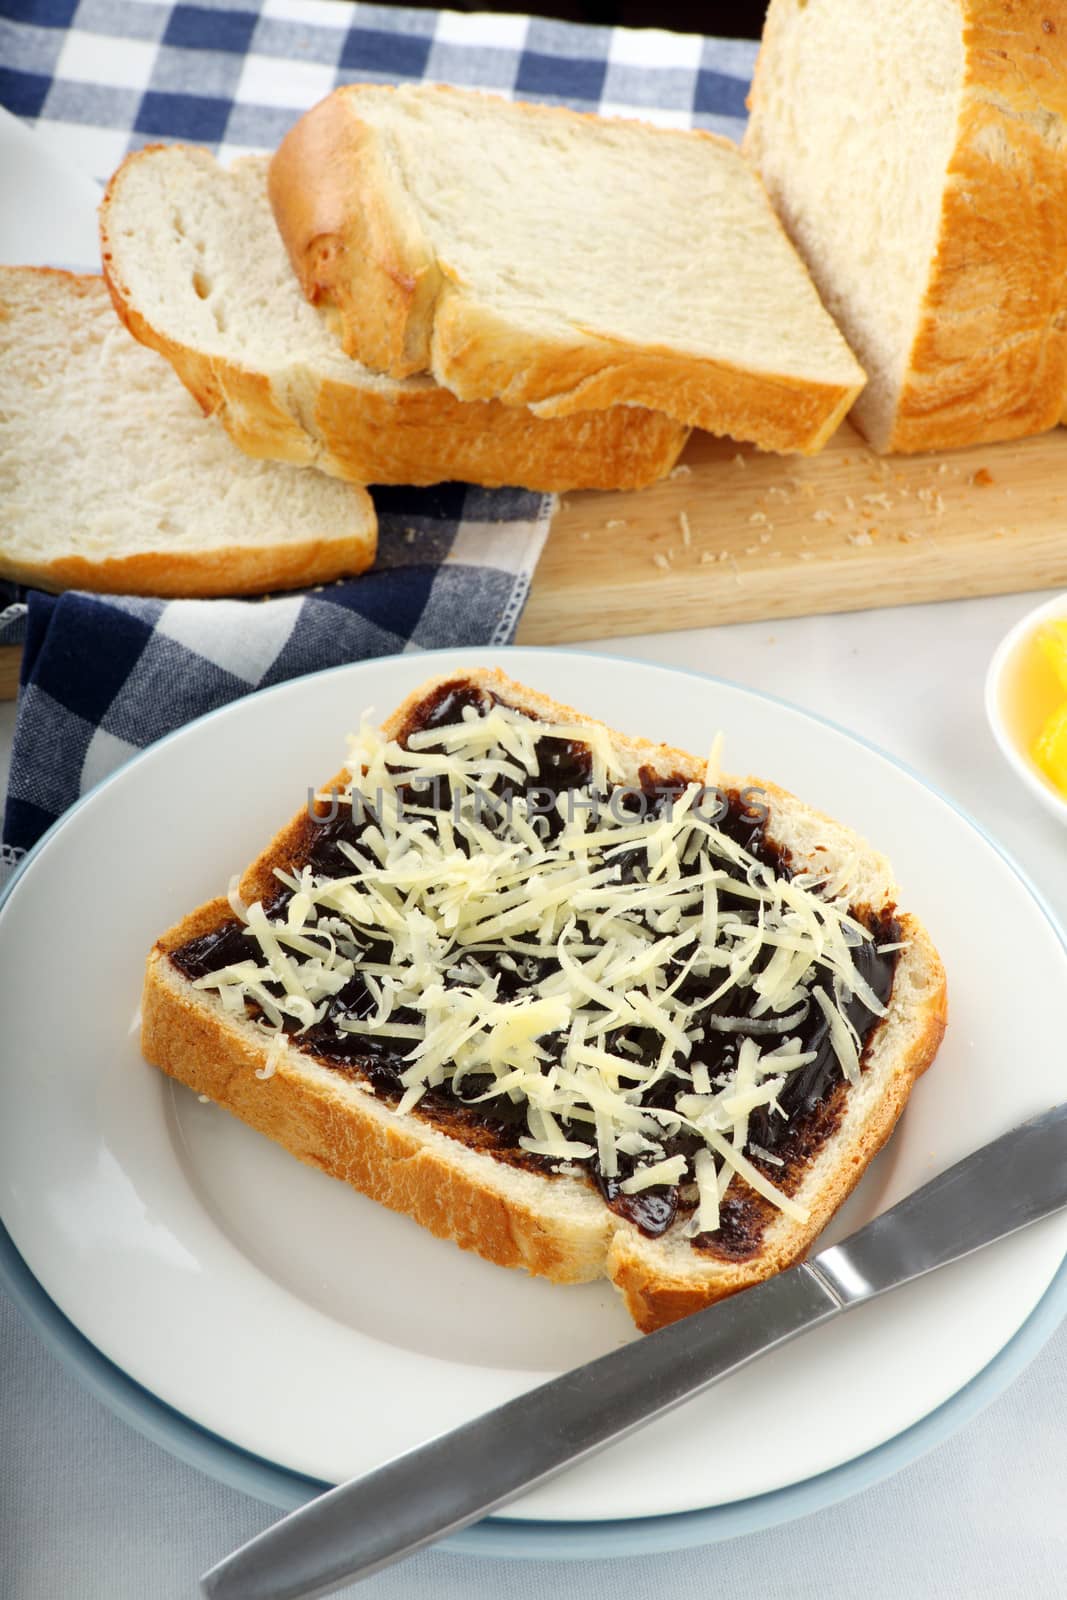 Vegemite sandwich with shredded cheese ready to serve.